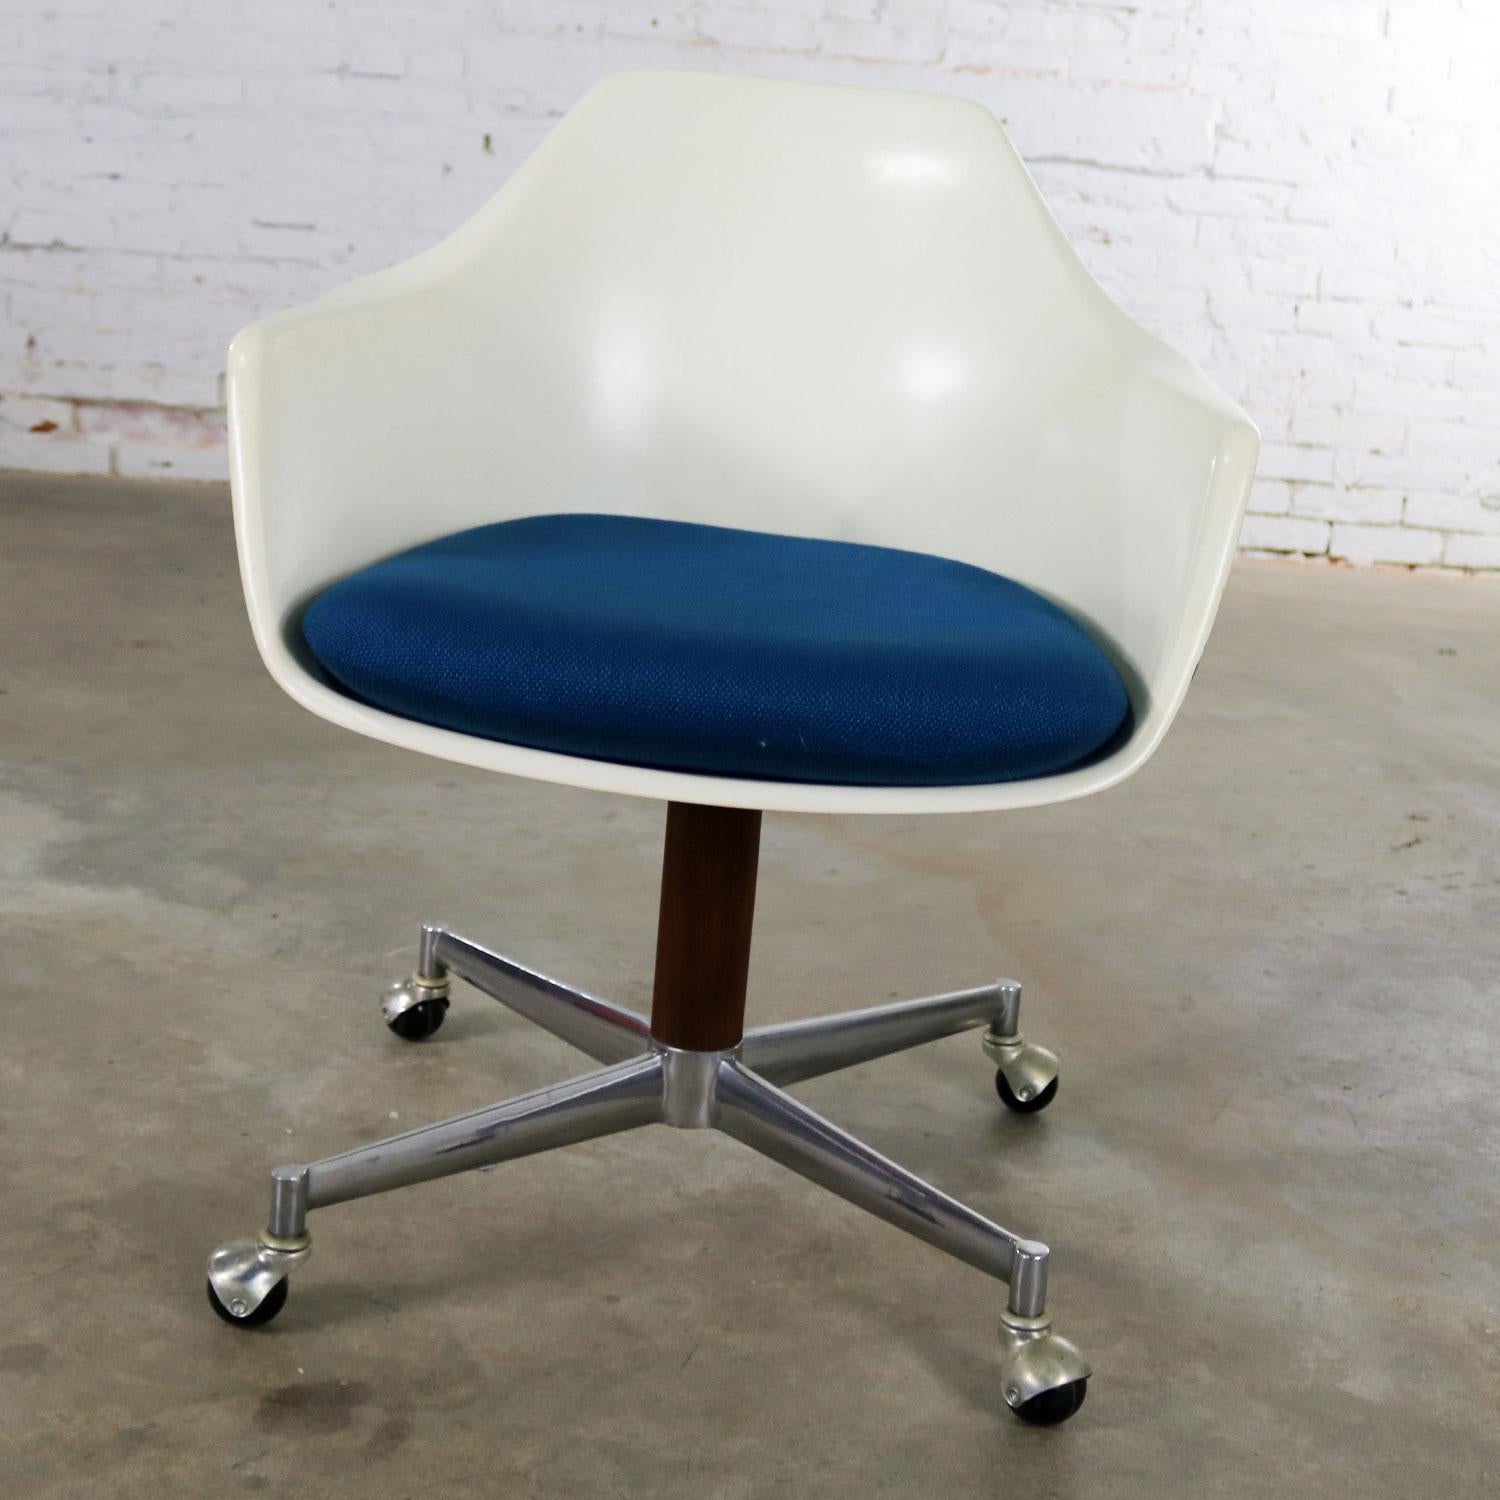 Handsome Mid-Century Modern rolling, swivel, and tilt office desk fiberglass shell armchairby Burke Inc. with a royal blue seat cushion and wood veneered steel shaft. It has the big Burke B and the number 116 embossed on the bottom along with Burke